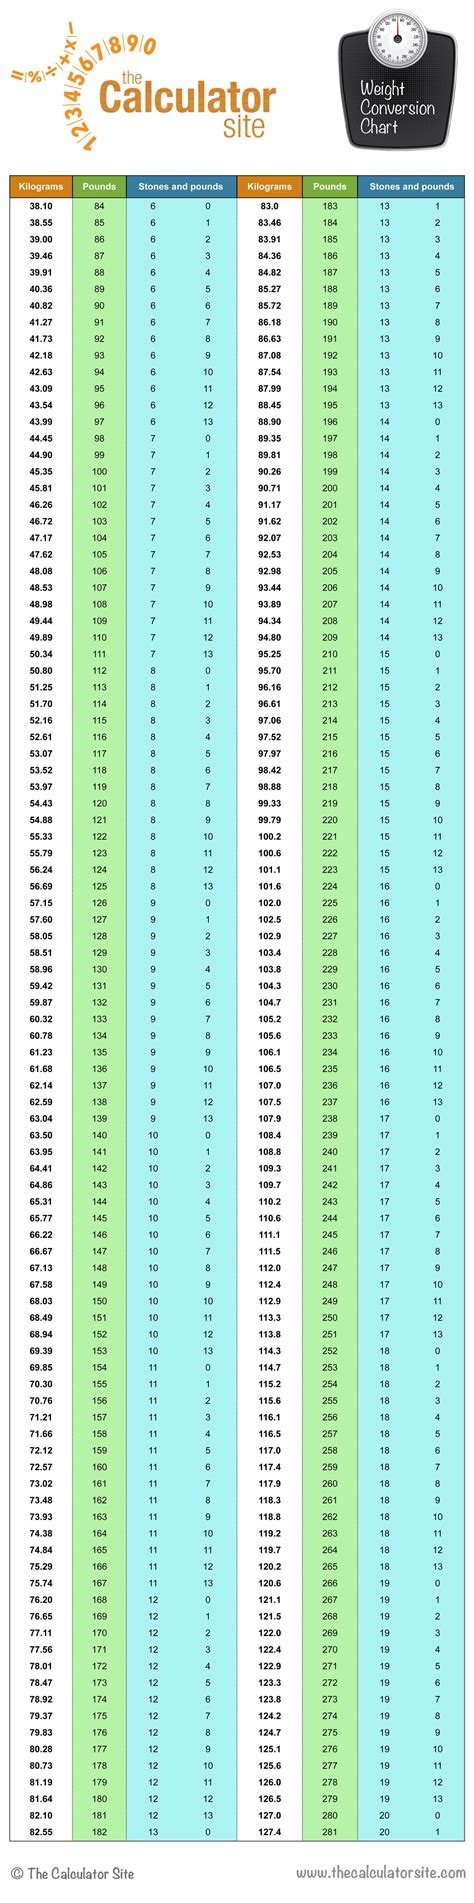 Weight Converter Chart. Should you wish to convert any other units of mass and weight not featured in the conversion form, please try the mass and weight converter.The height chart below shows conversions from kg to stones and pounds, rounded to a maximum of 2 decimal places.